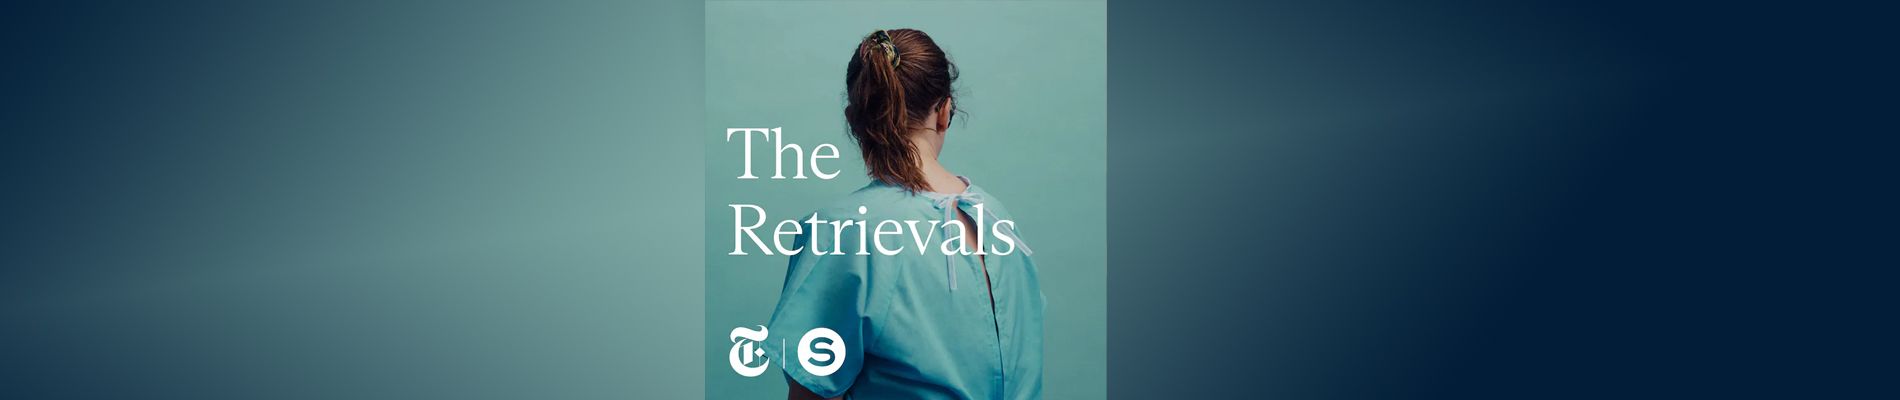 Serial's New Podcast, The Retrievals just announced - Trailer